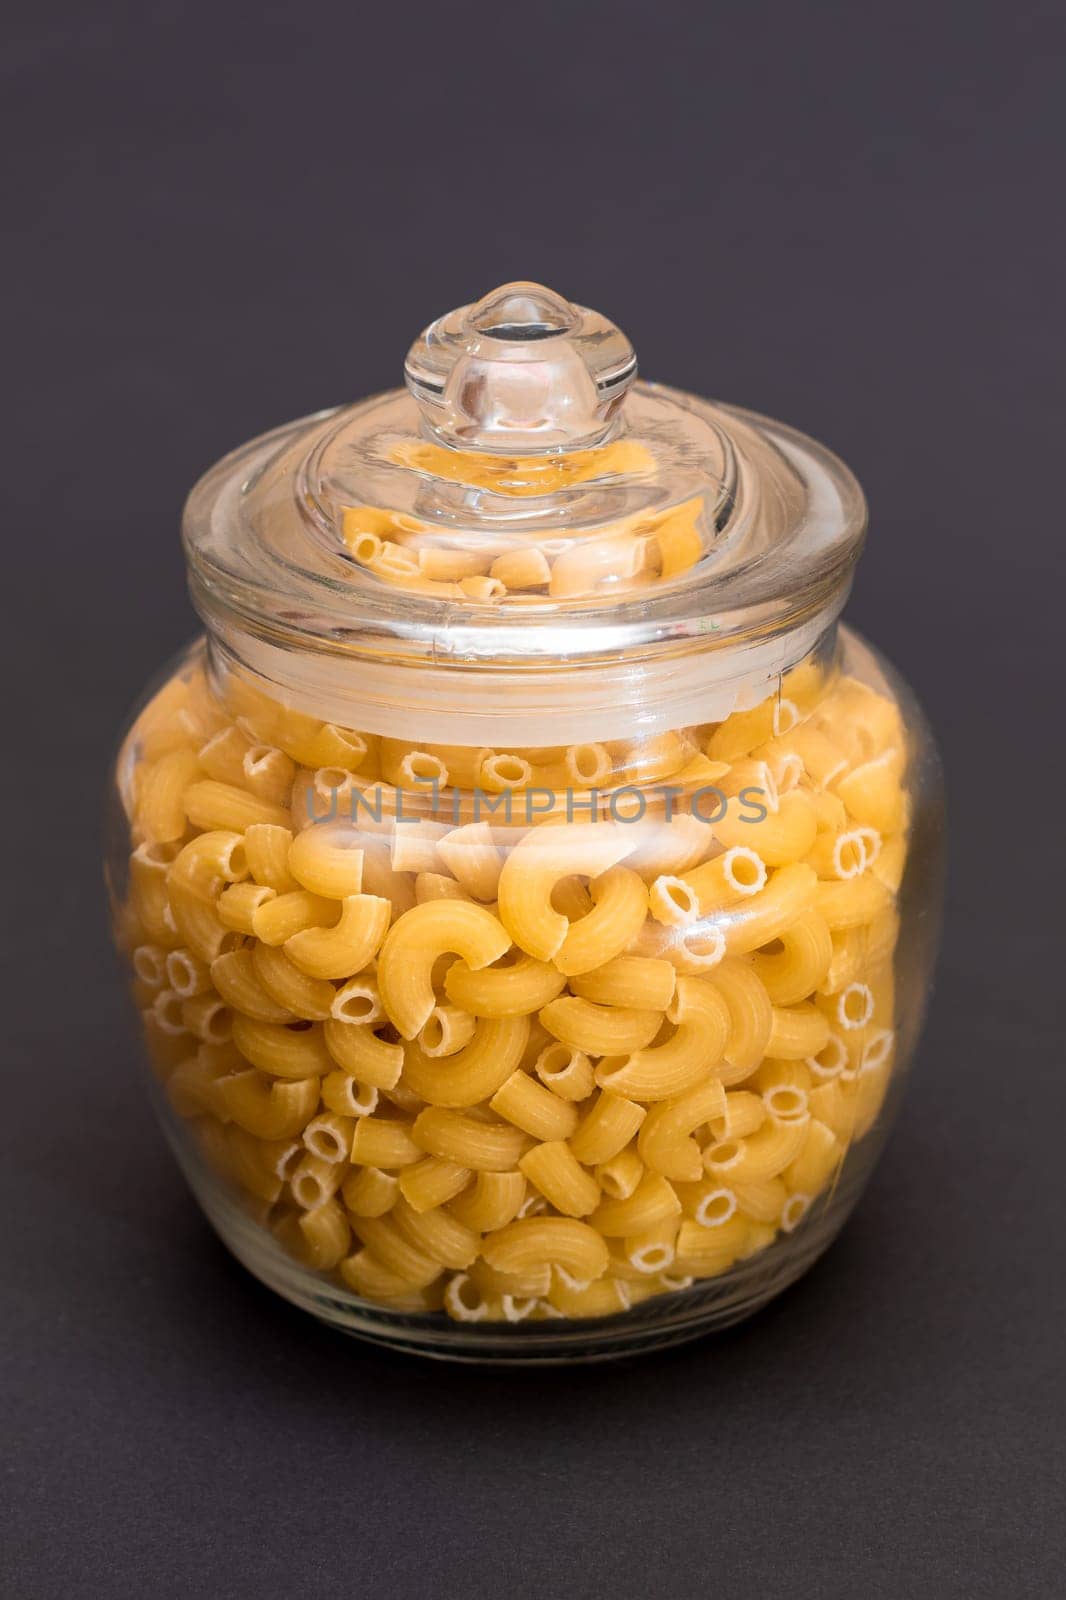 Uncooked Chifferi Rigati Pasta in Glass Jar on Black Background. Fat and Unhealthy Food. Classic Dry Macaroni. Italian Culture and Cuisine. Raw Pasta